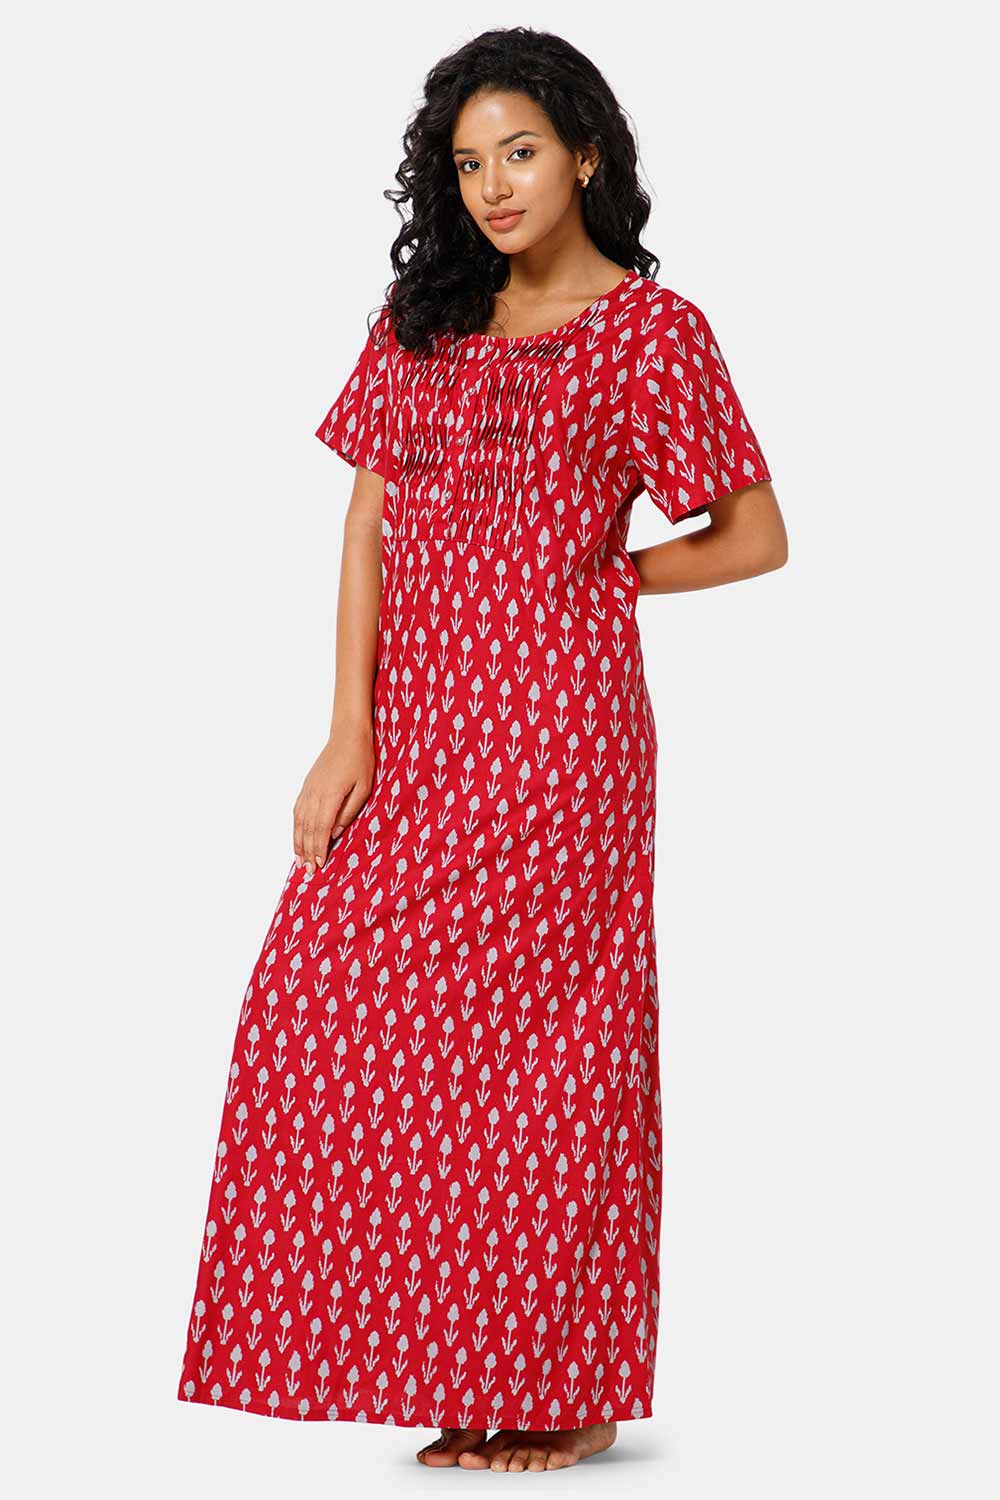 Naidu Hall Front Open Round Neck Short Sleeve Printed Nighty-Red - NT52